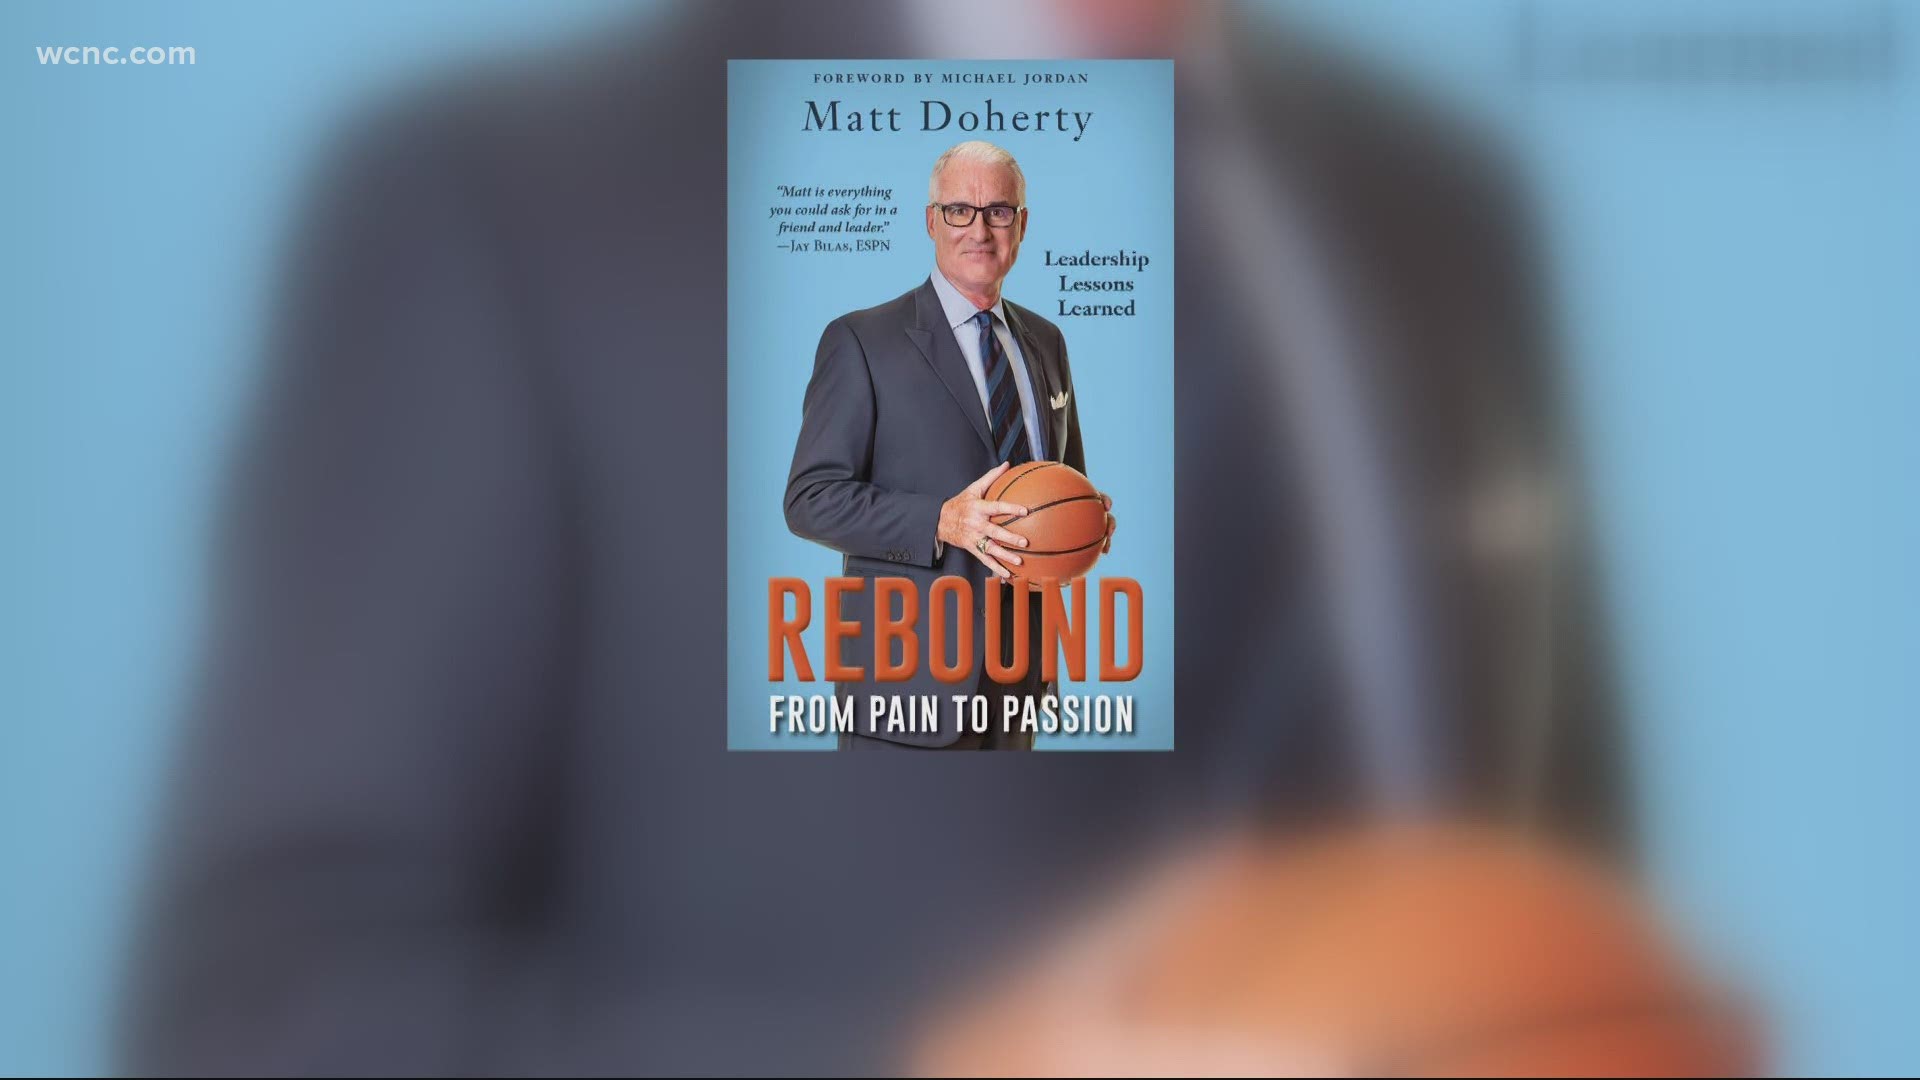 Former UNC basketball coach Matt Doherty has published a new book, REBOUND: From Pain to Passion.